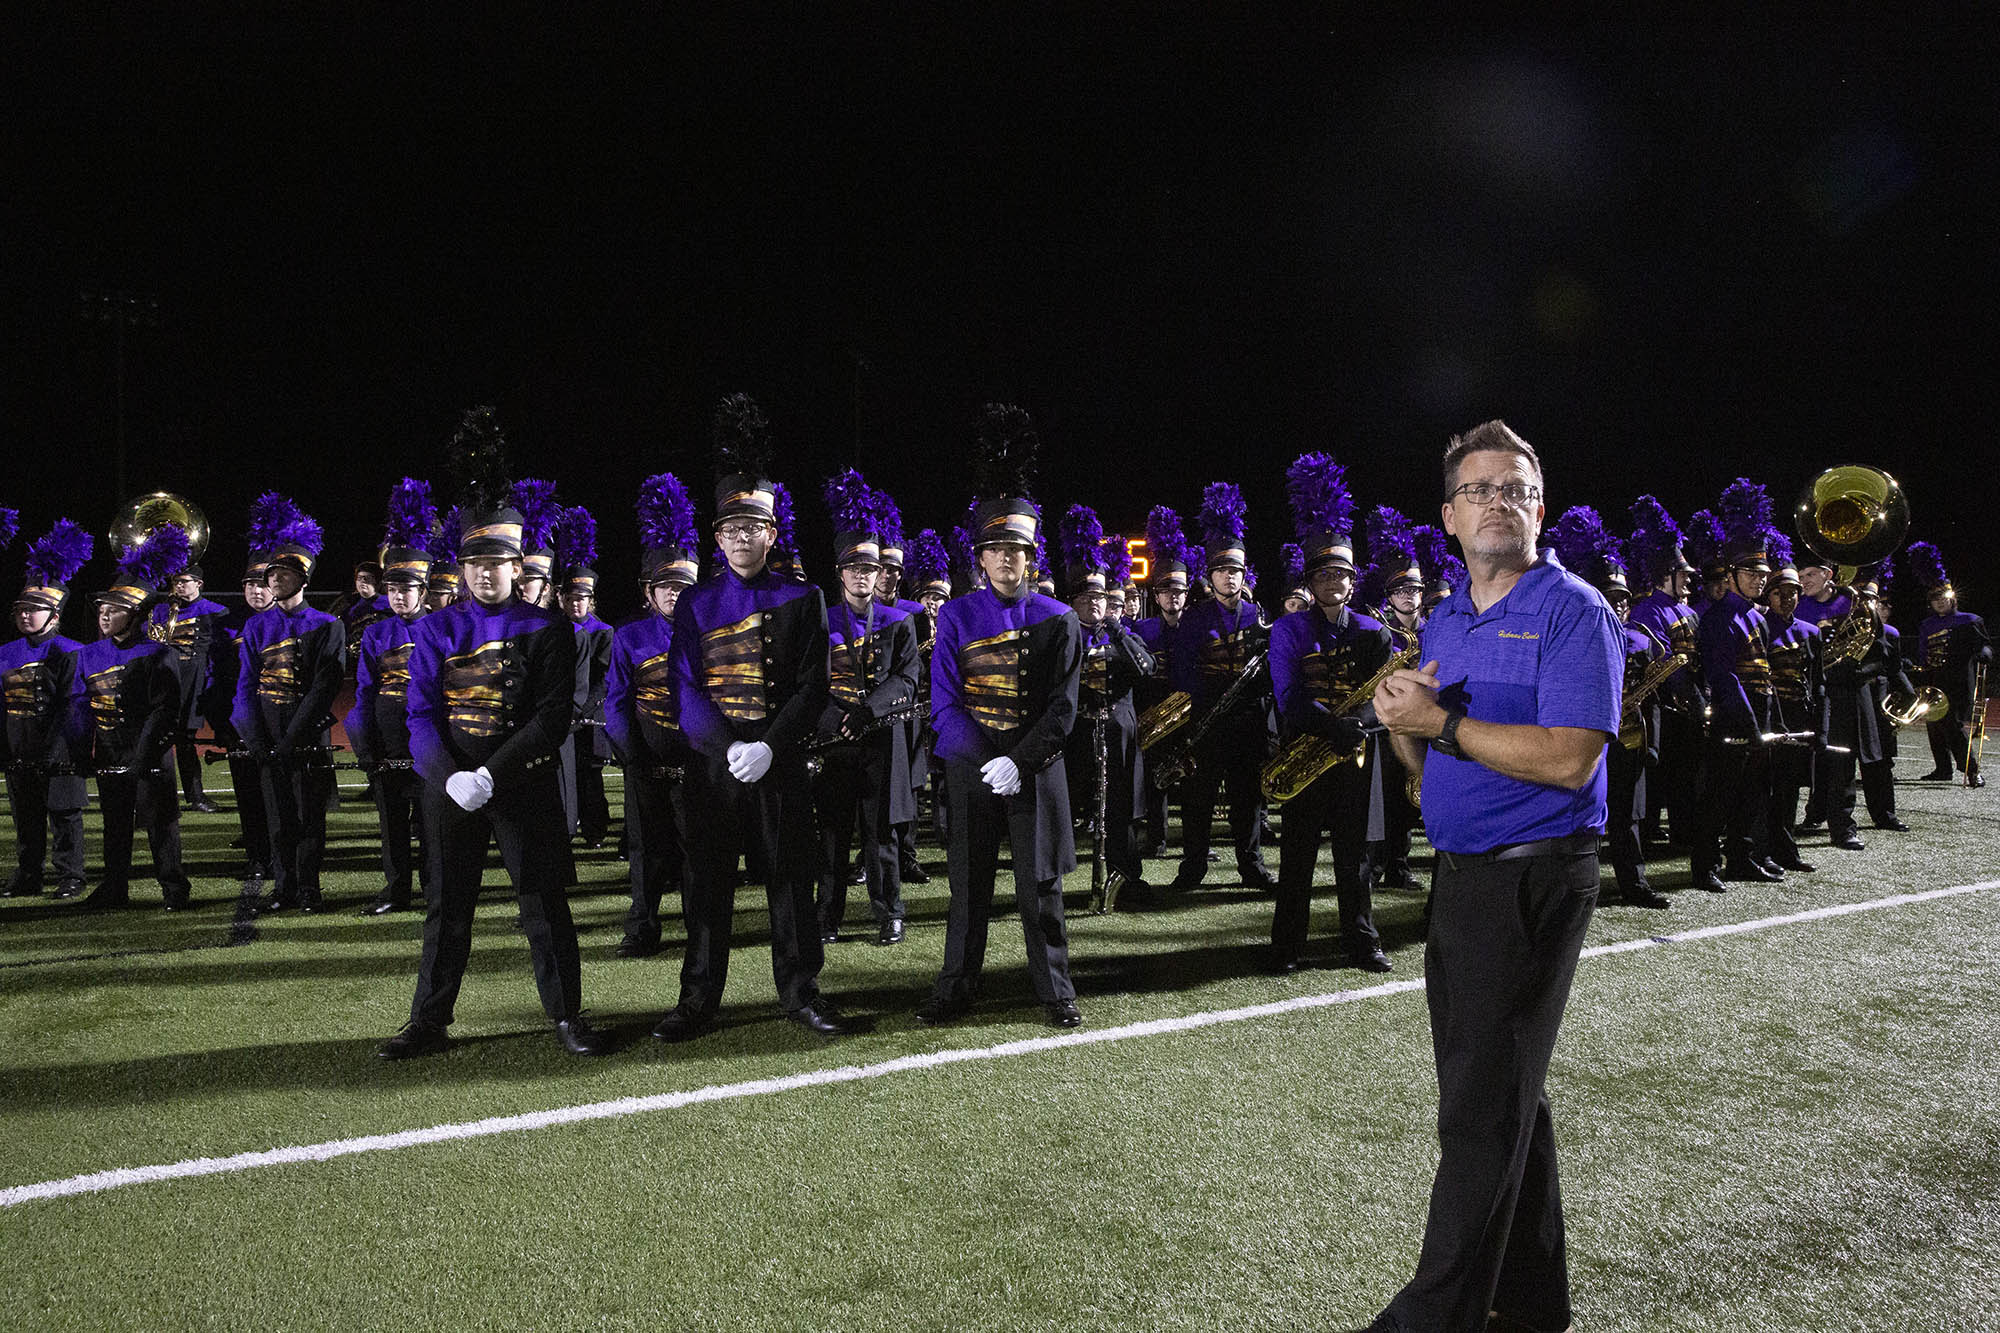 denis swope looks on with the hickman marching band behind him